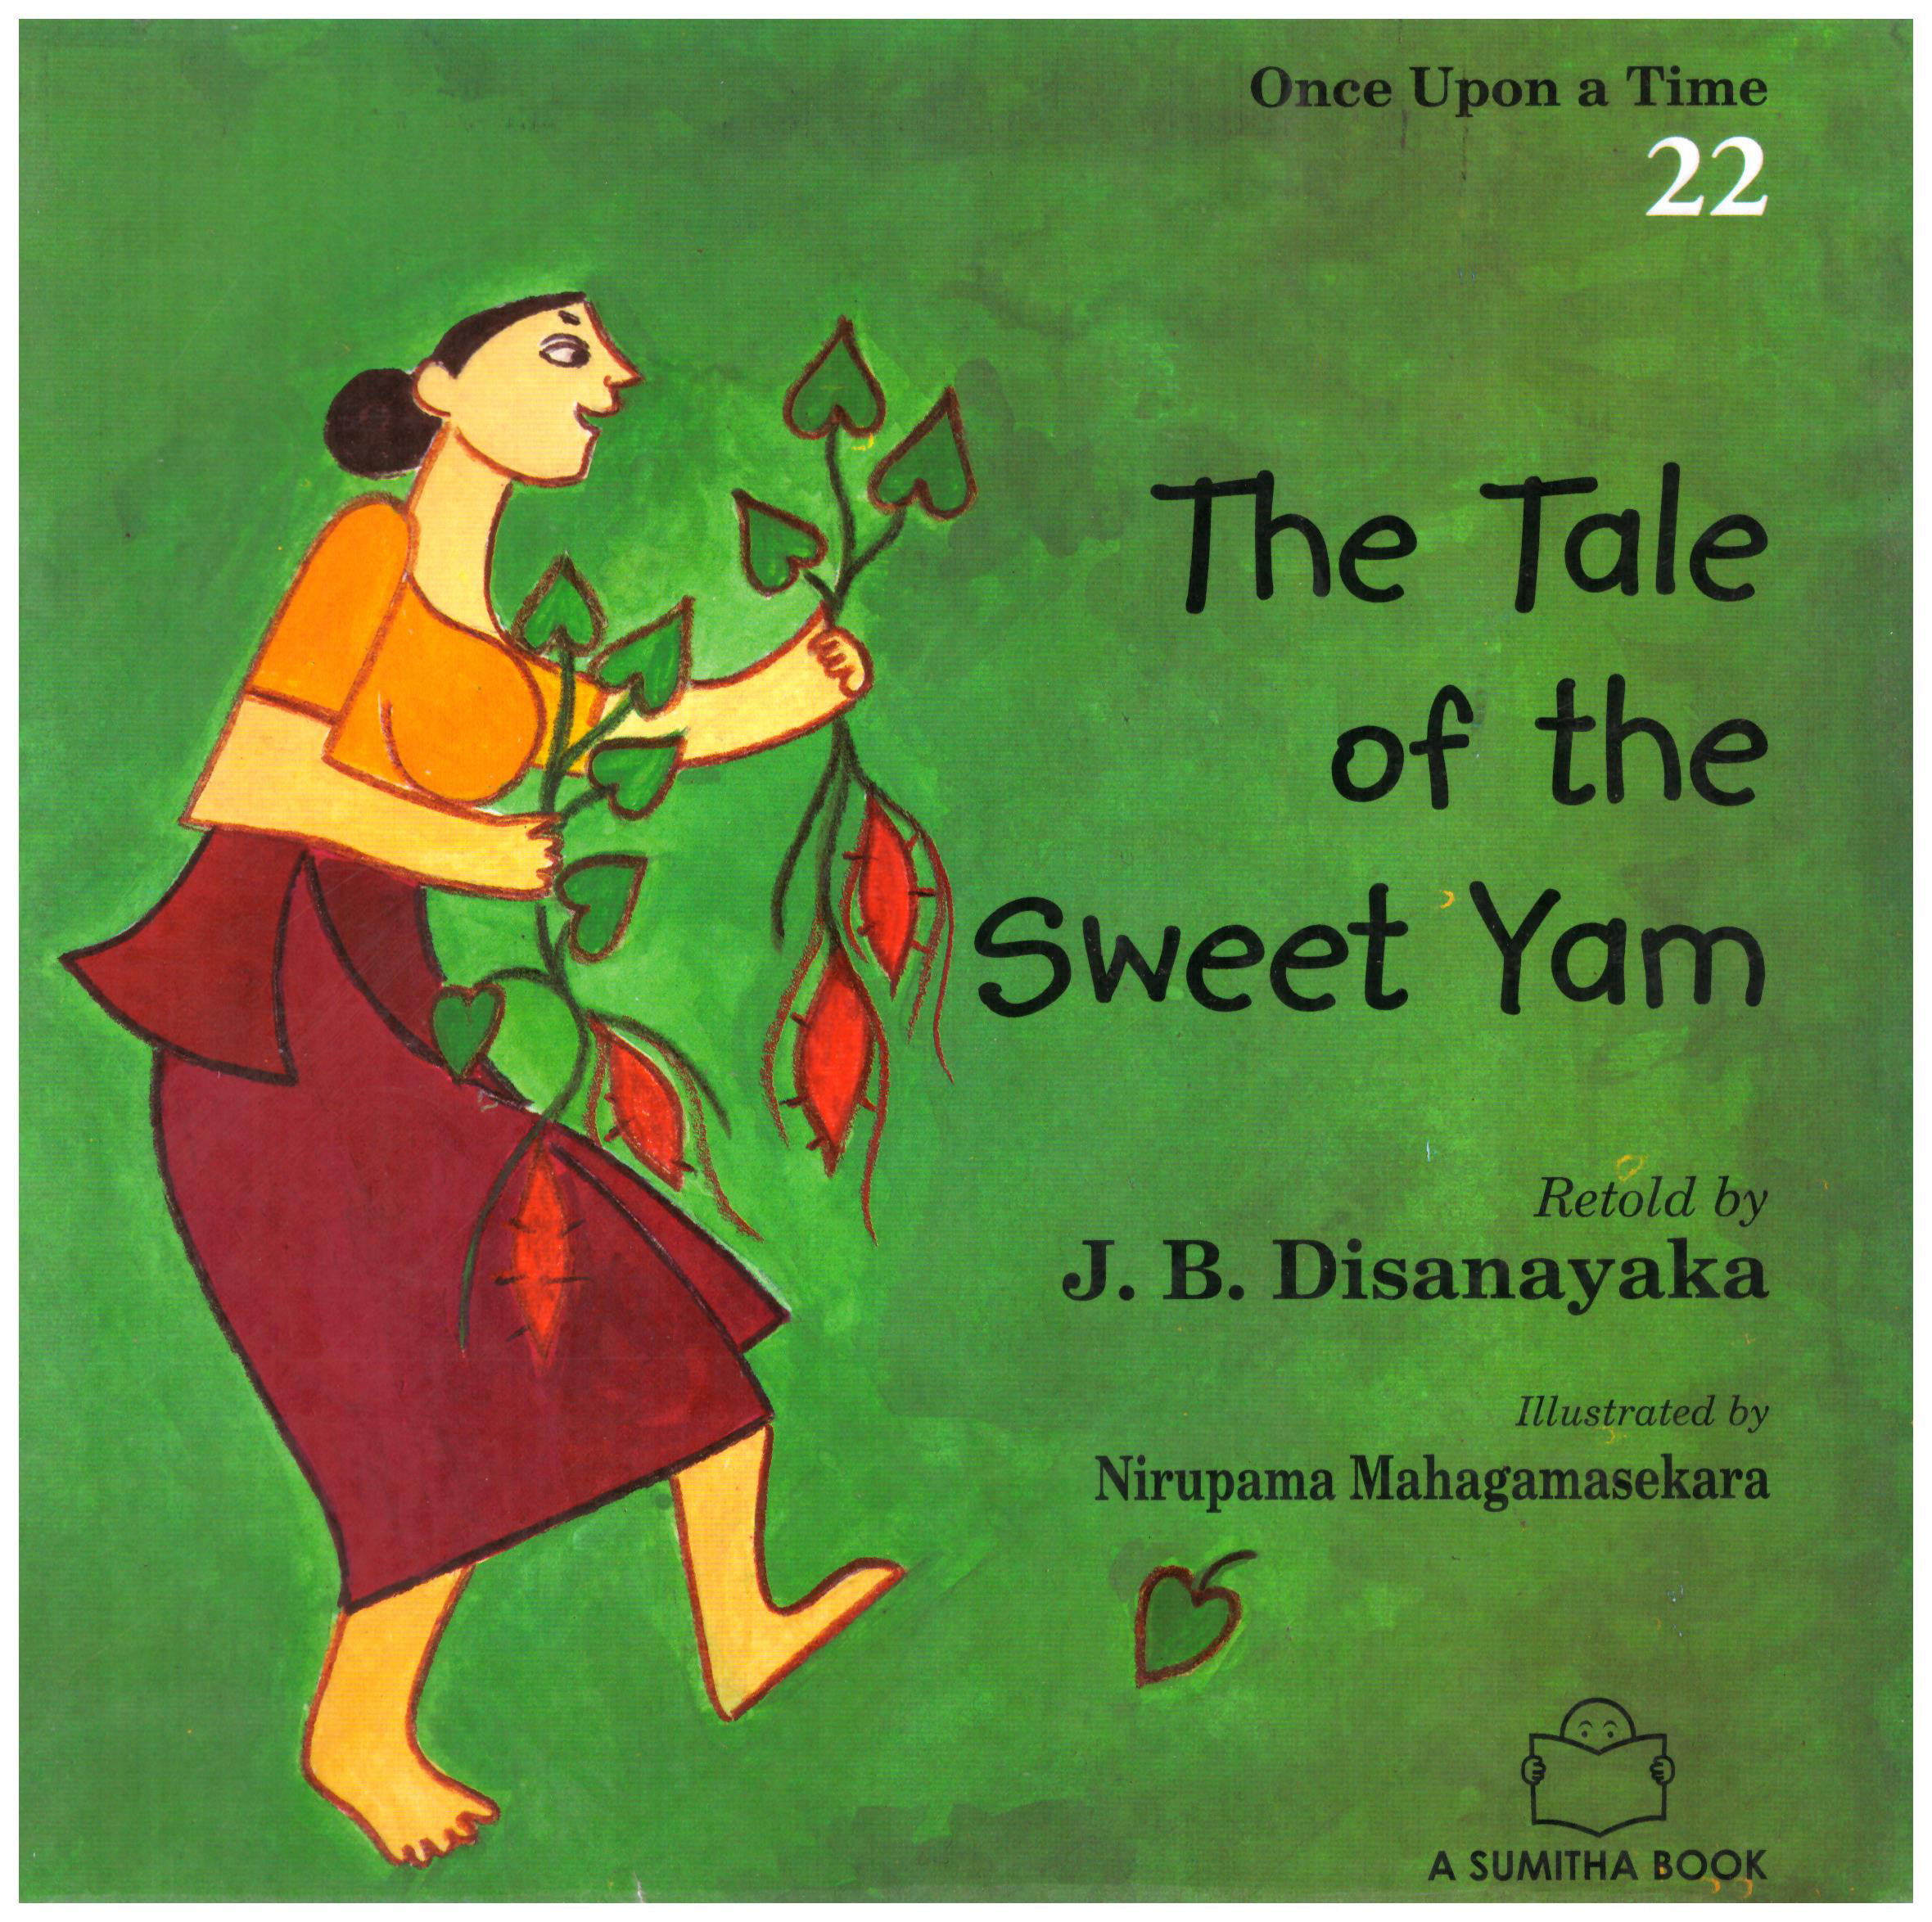 Once Upon a Time 22 - The Tale of the Sweet Yam